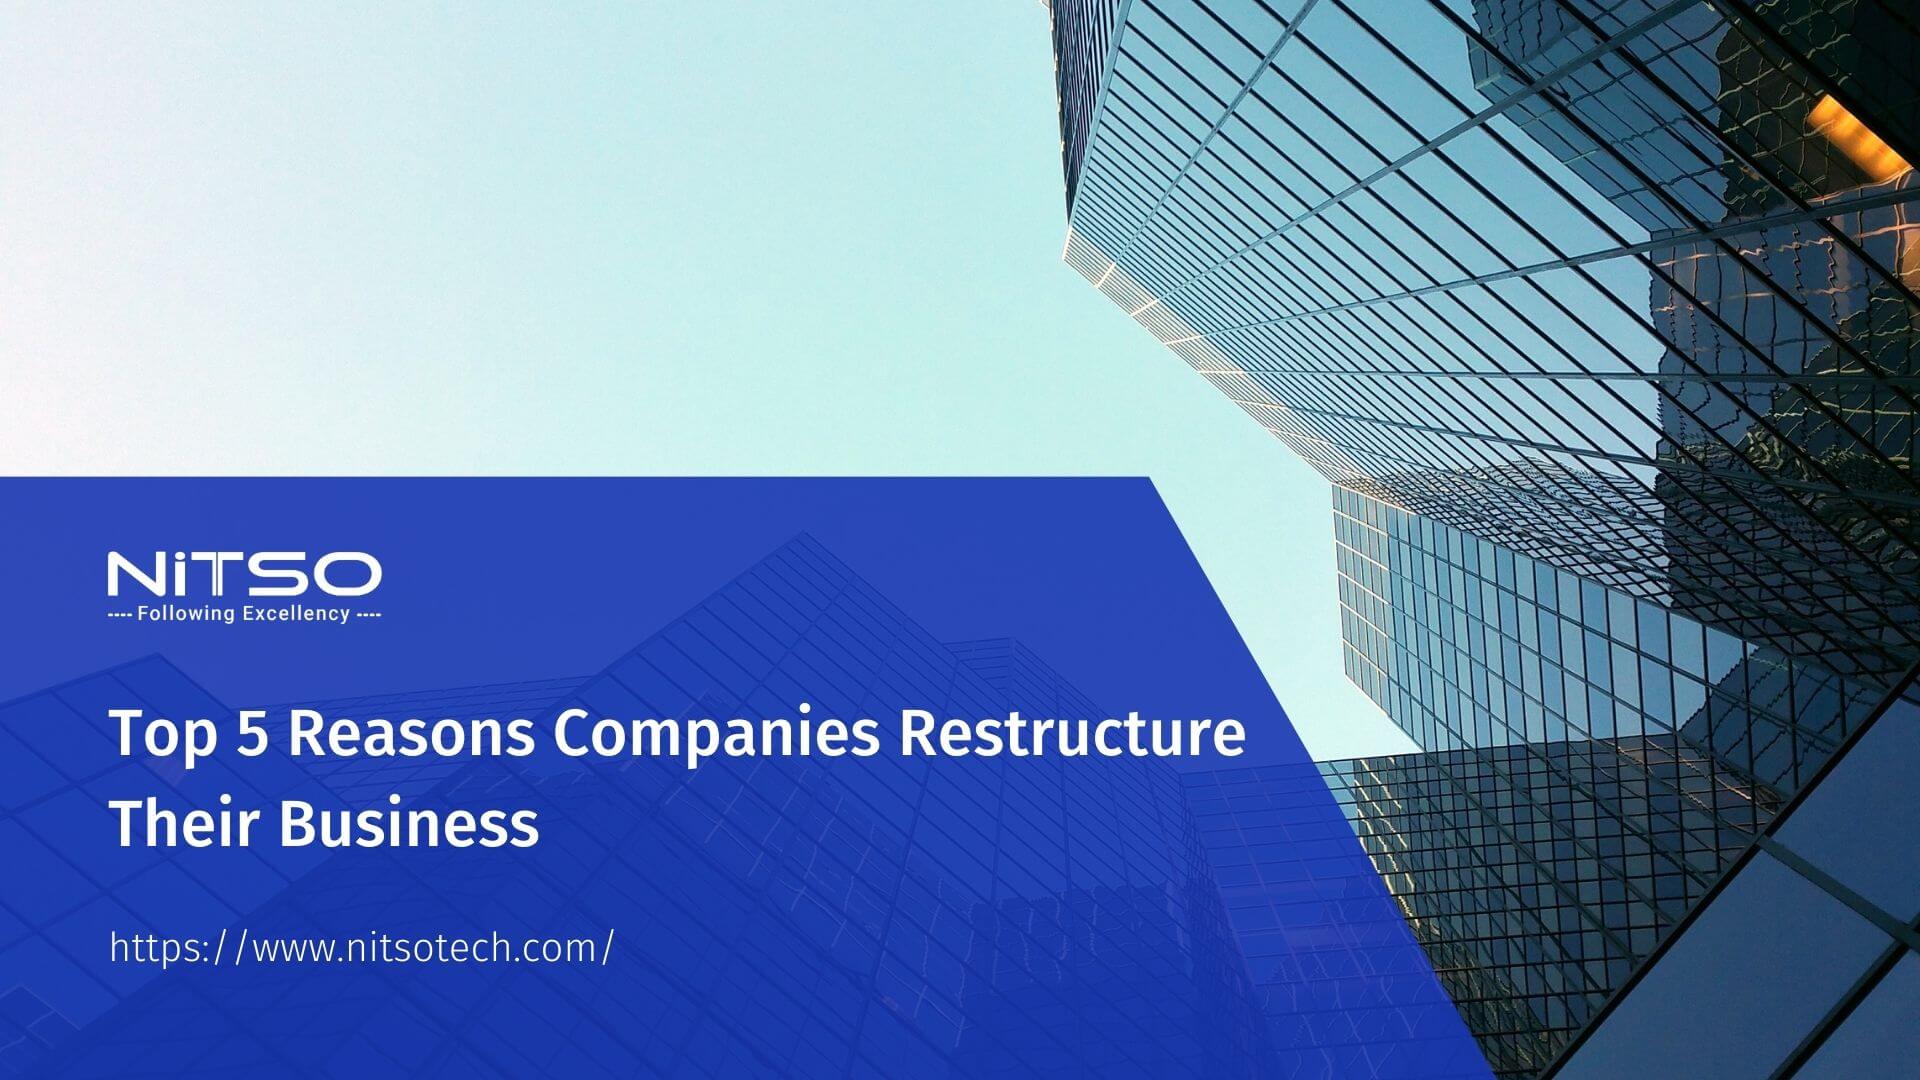 Top 5 Reasons Companies Restructure Their Business